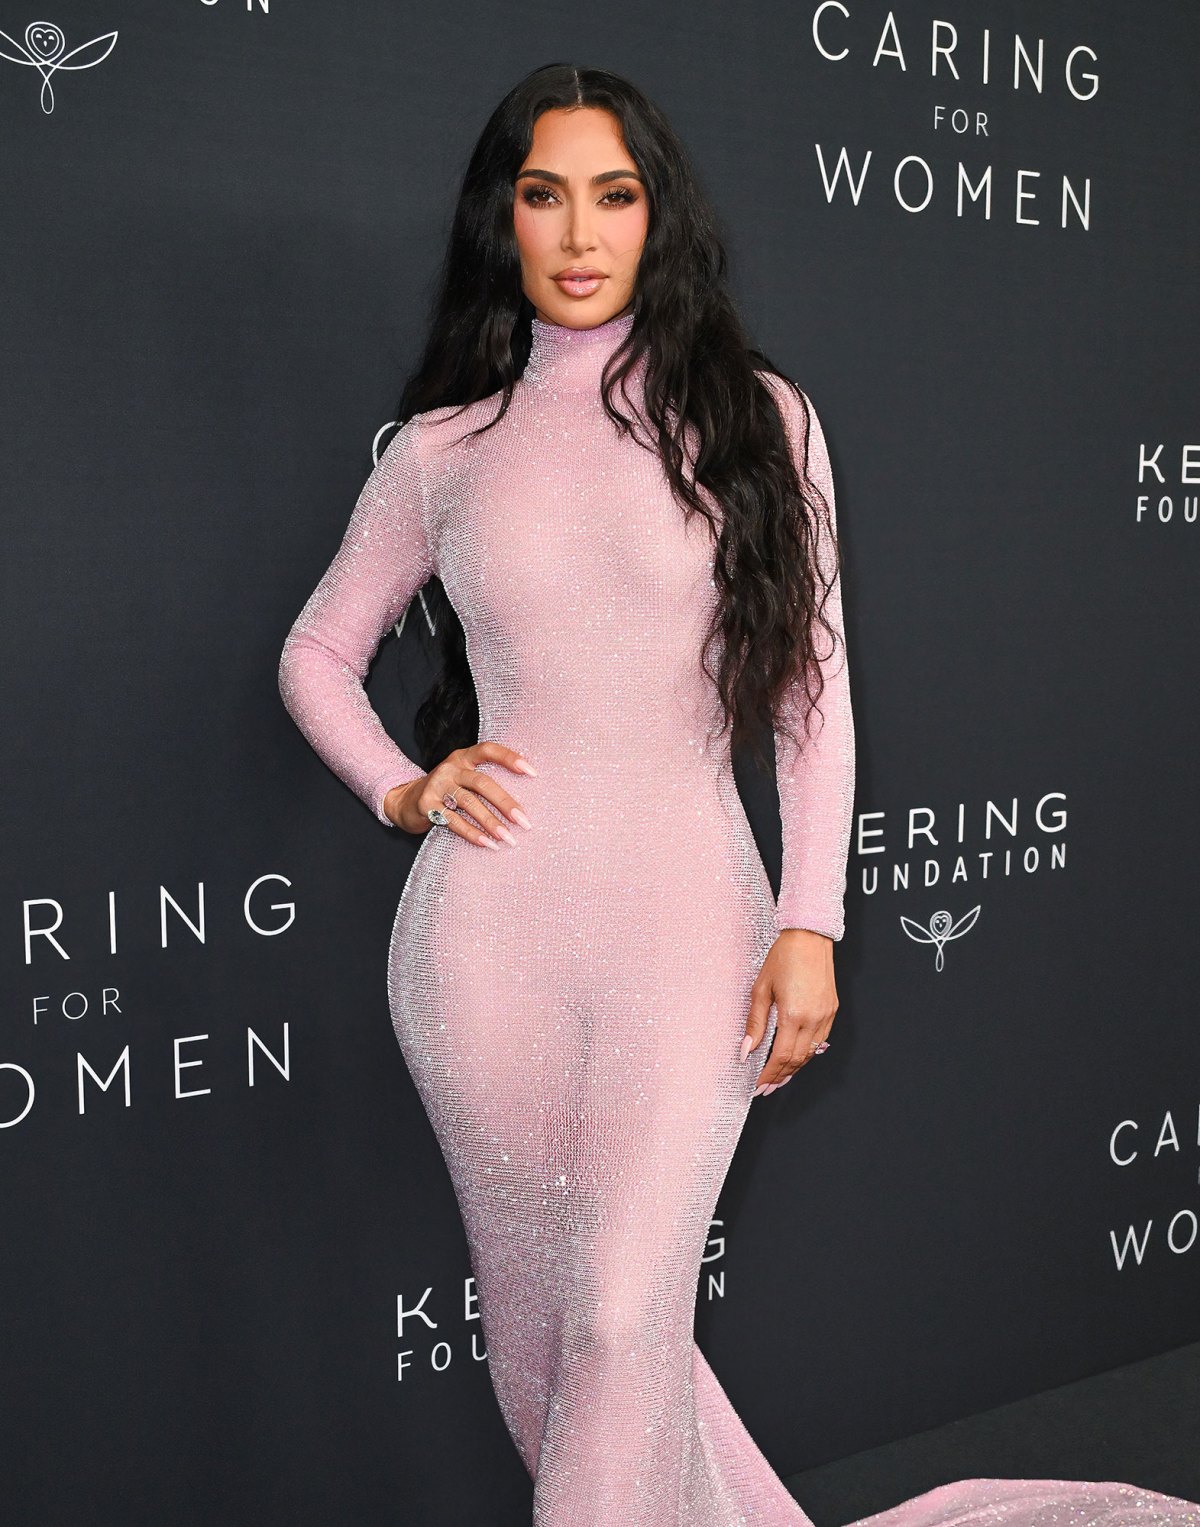 Kim Kardashian wears an outfit that shows off her figure as she